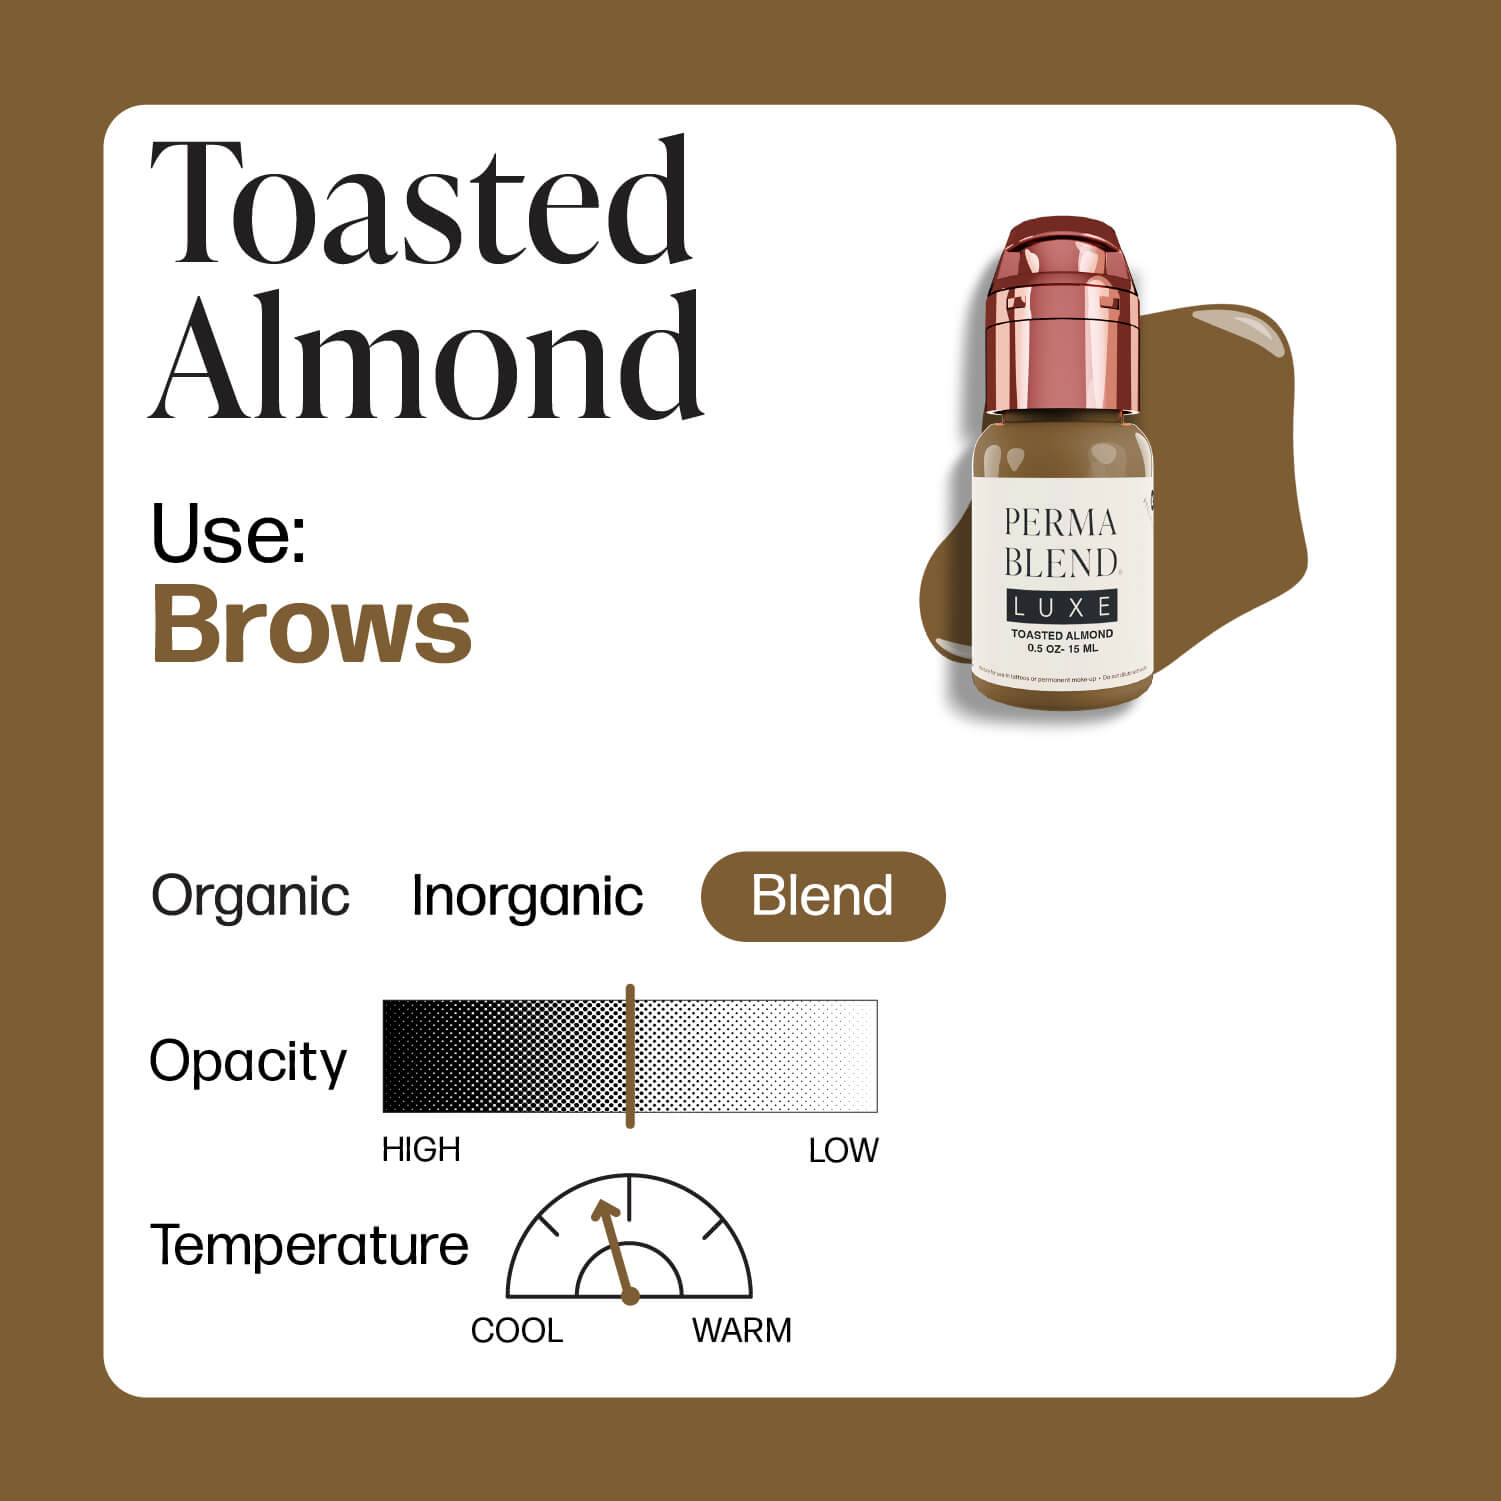 LUXE - Toasted Almond